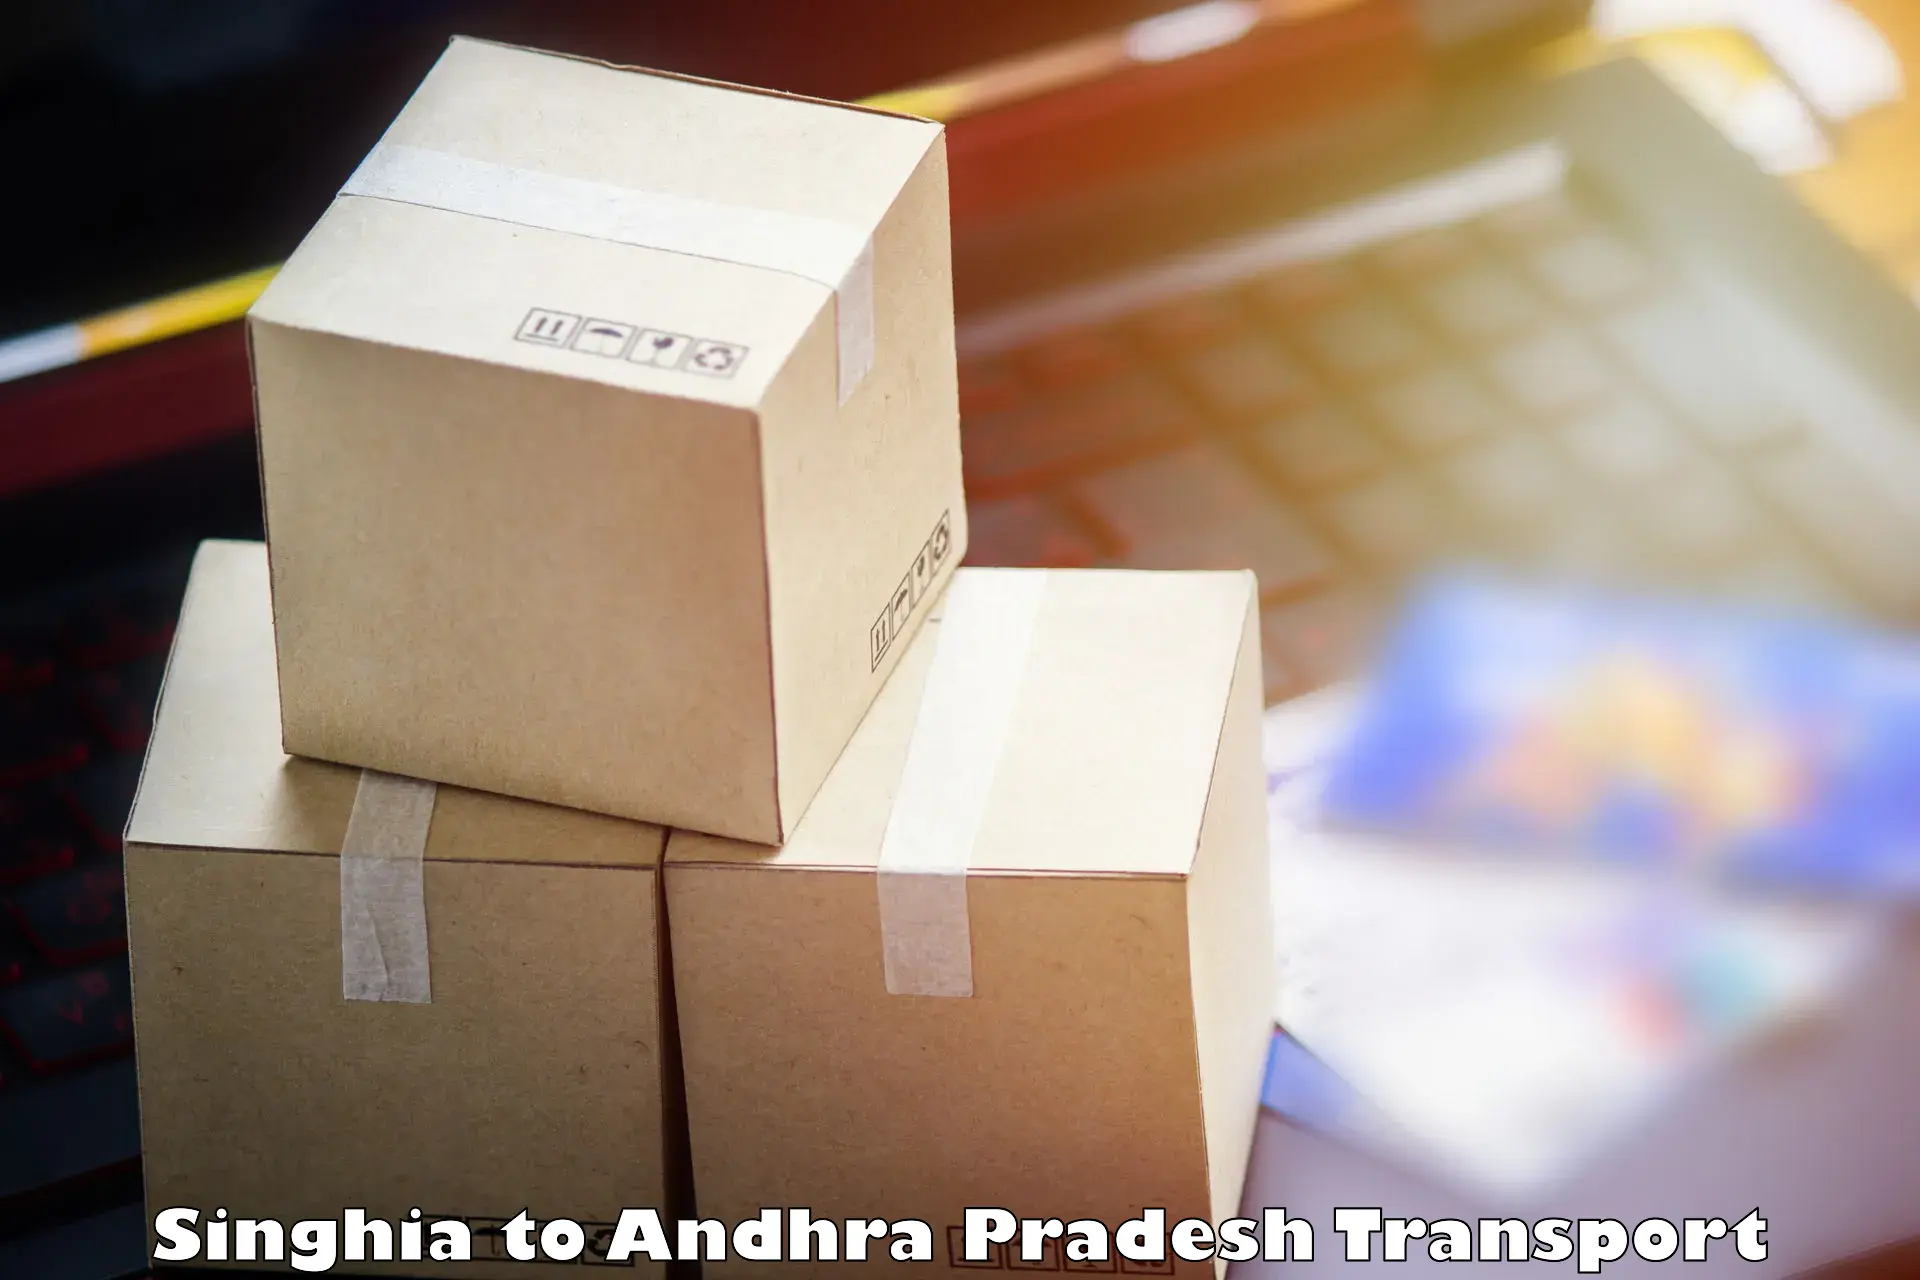 Air cargo transport services in Singhia to Sri City